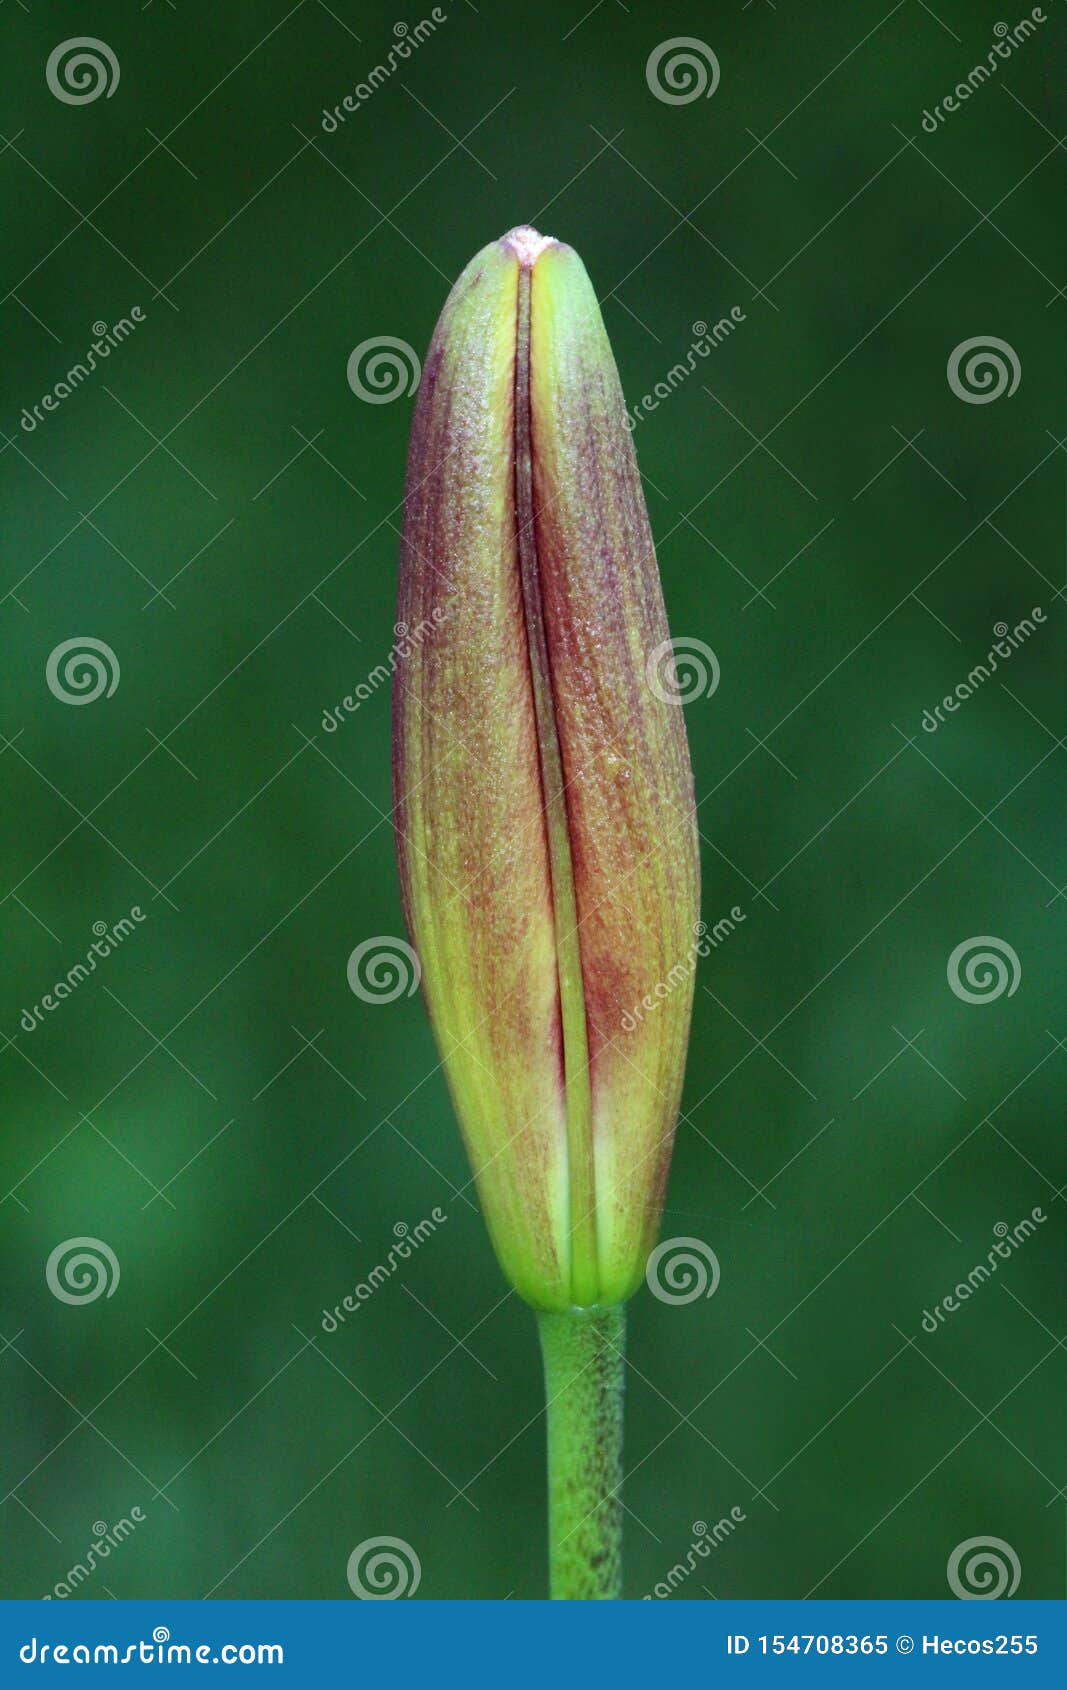 Lily or Lilium Dark Red Fully Closed Perennial Flower Bud Waiting To ...